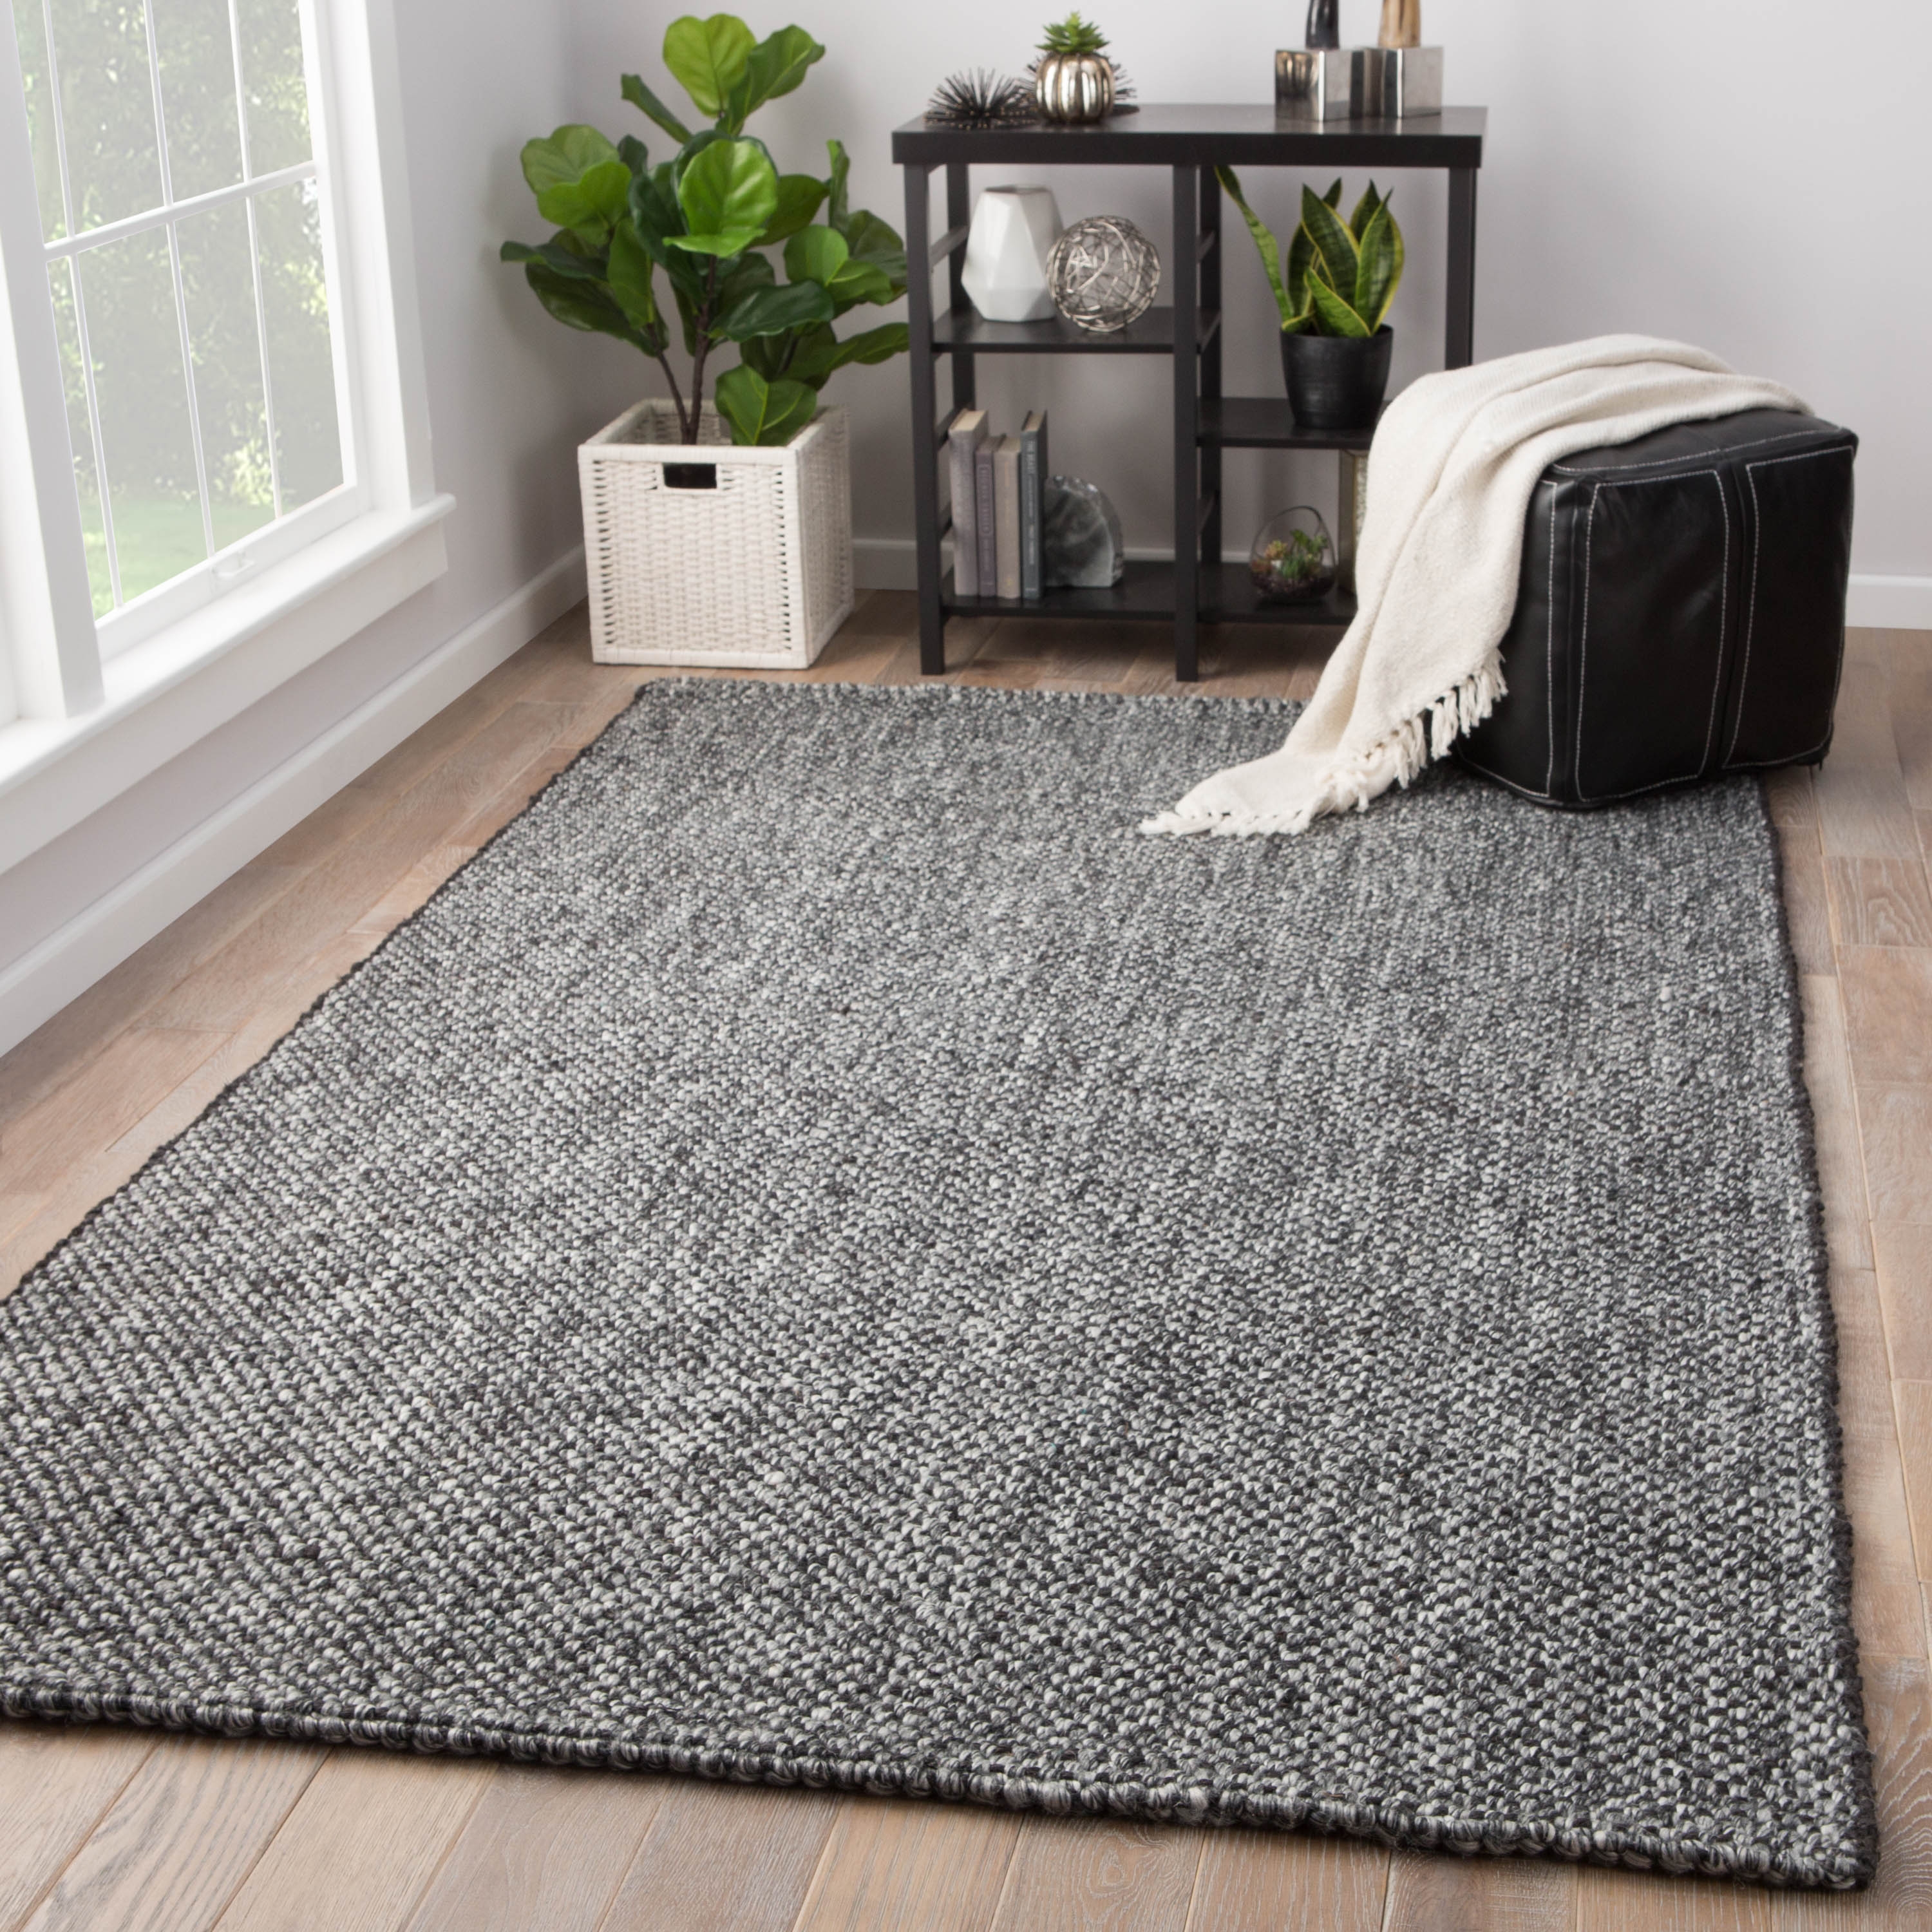 Topper Handmade Solid Black/ Gray Area Rug (8' X 10') - Image 4